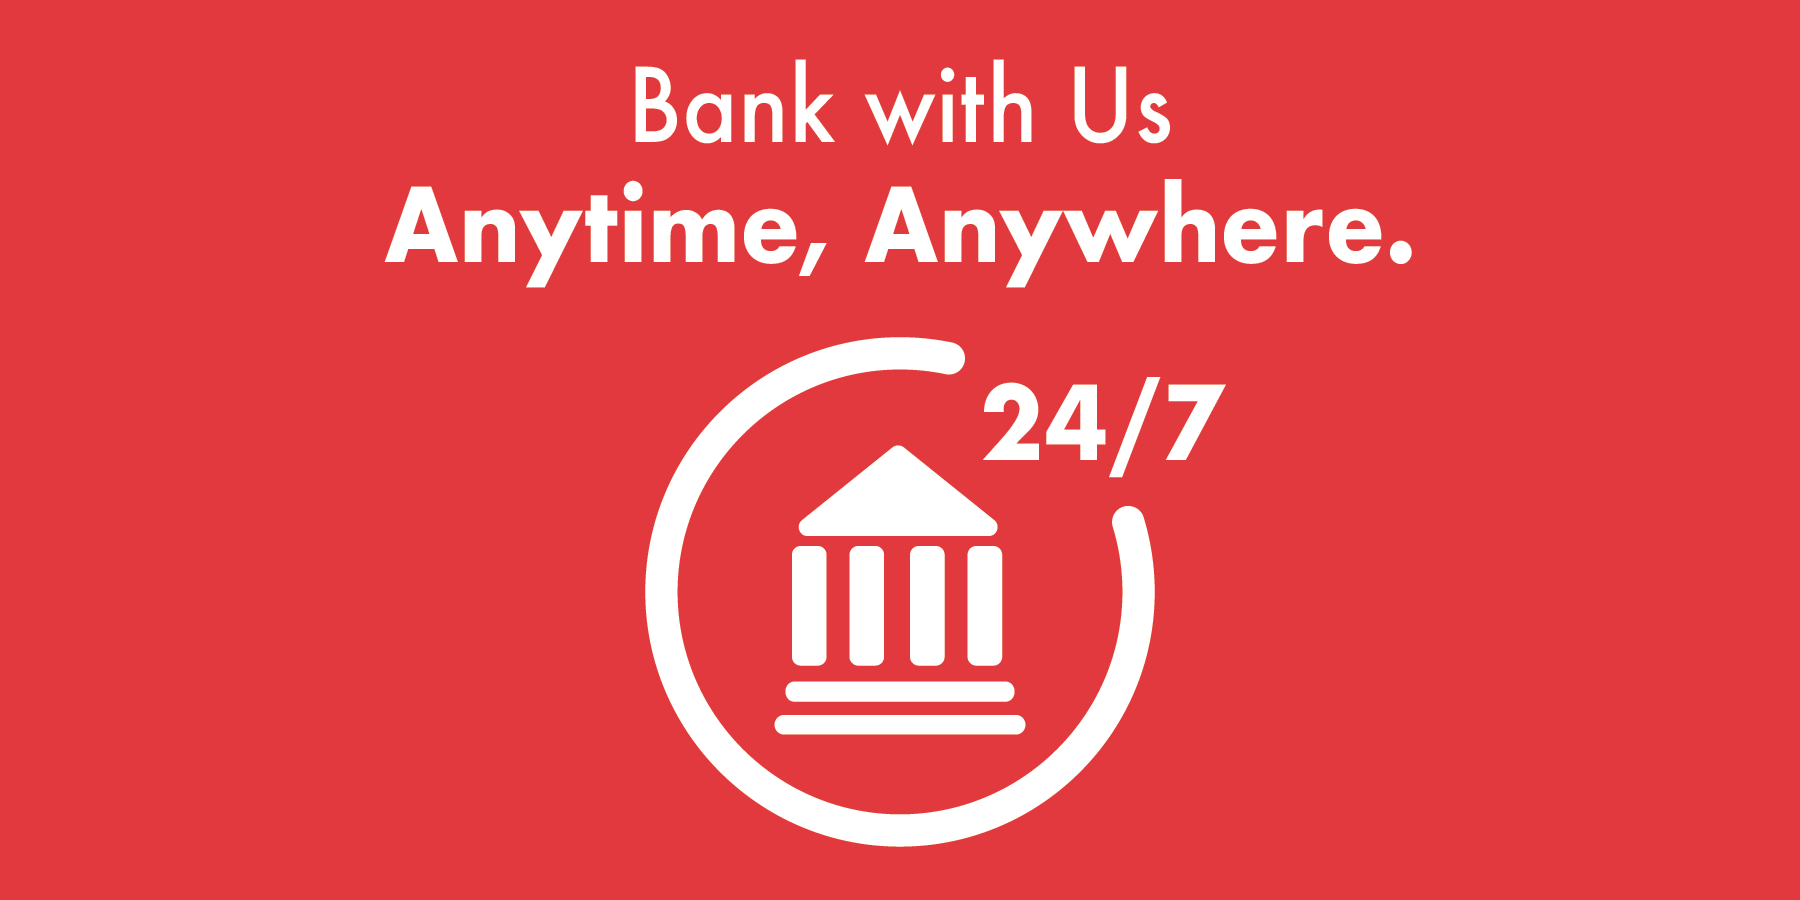 Bank With Us Anytime, Anywhere